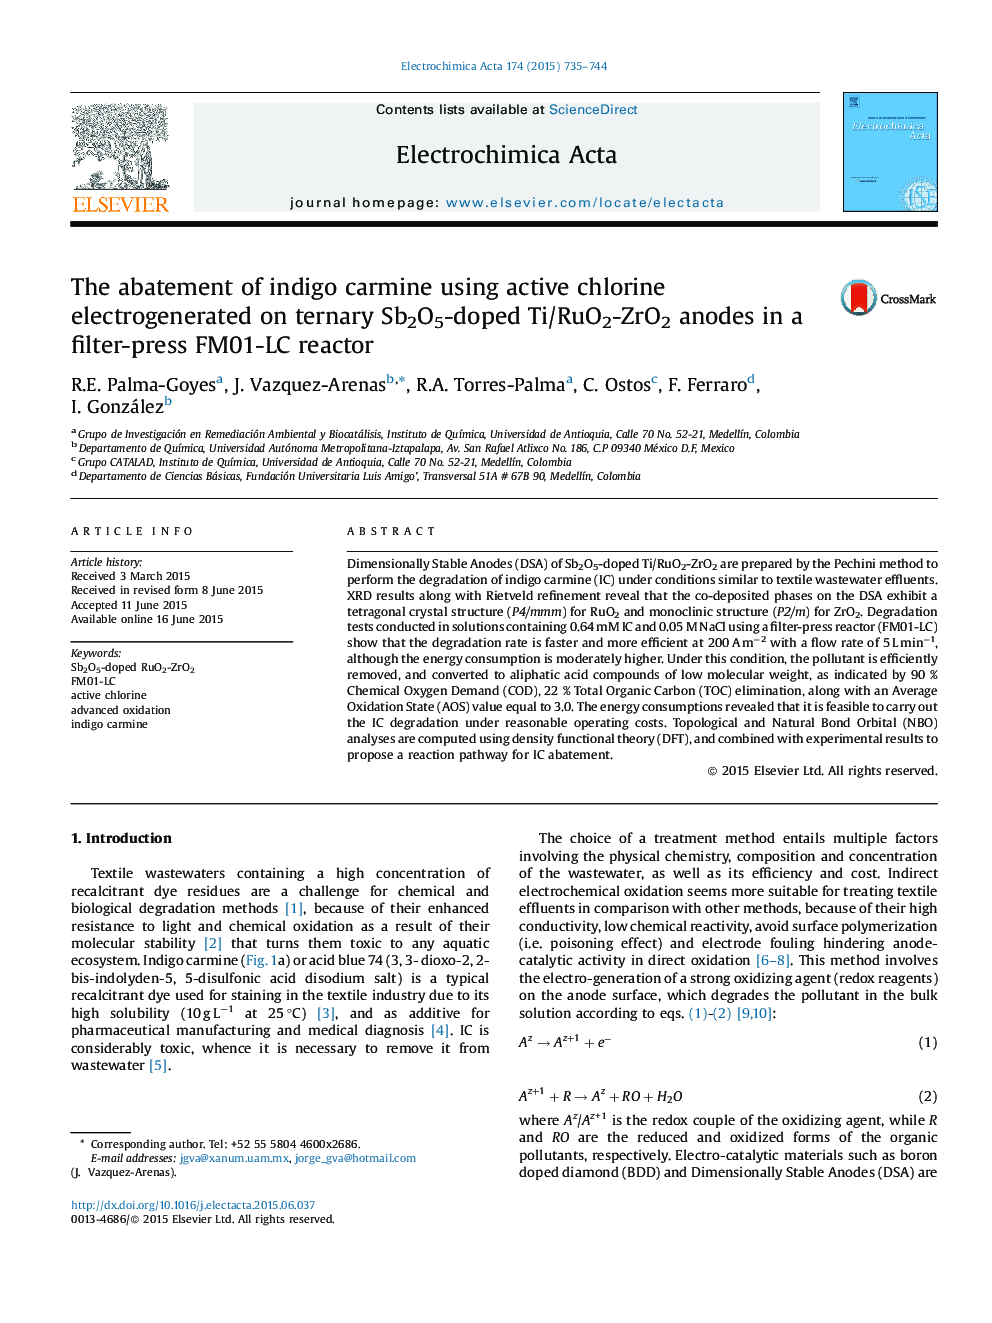 The abatement of indigo carmine using active chlorine electrogenerated on ternary Sb2O5-doped Ti/RuO2-ZrO2 anodes in a filter-press FM01-LC reactor